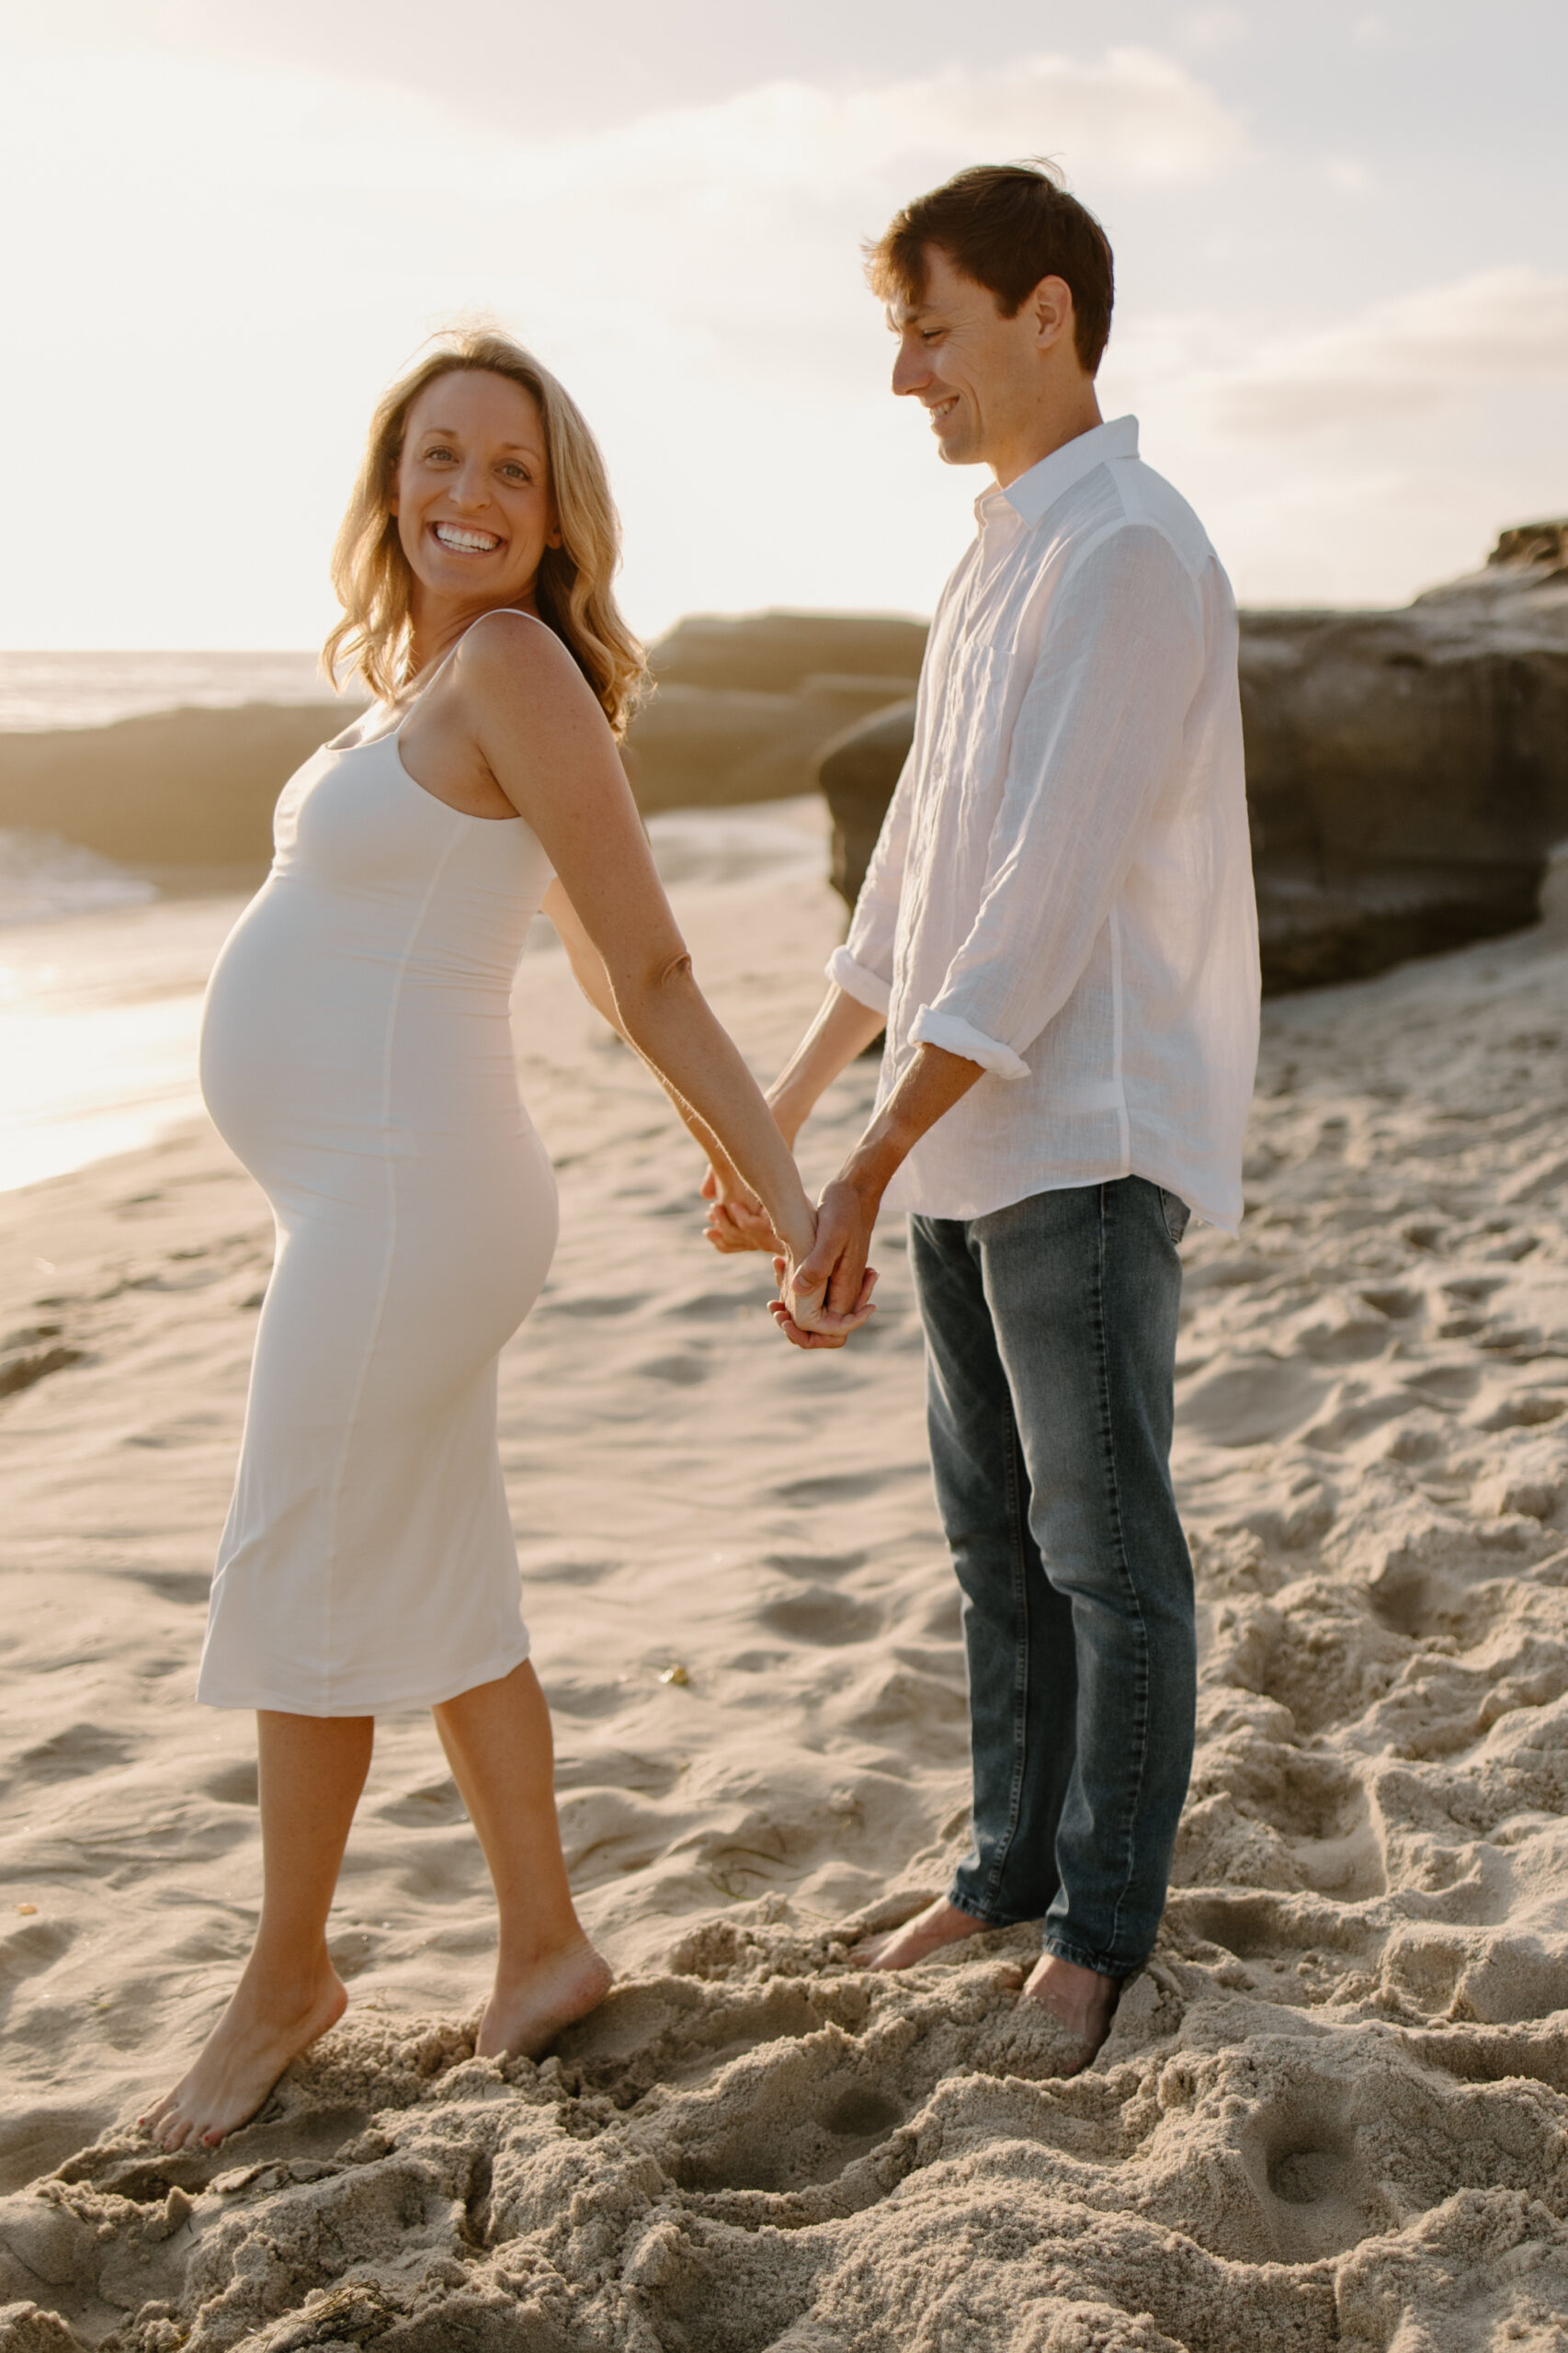 Pregnant woman and man standing on a beach in san diego during their maternity session